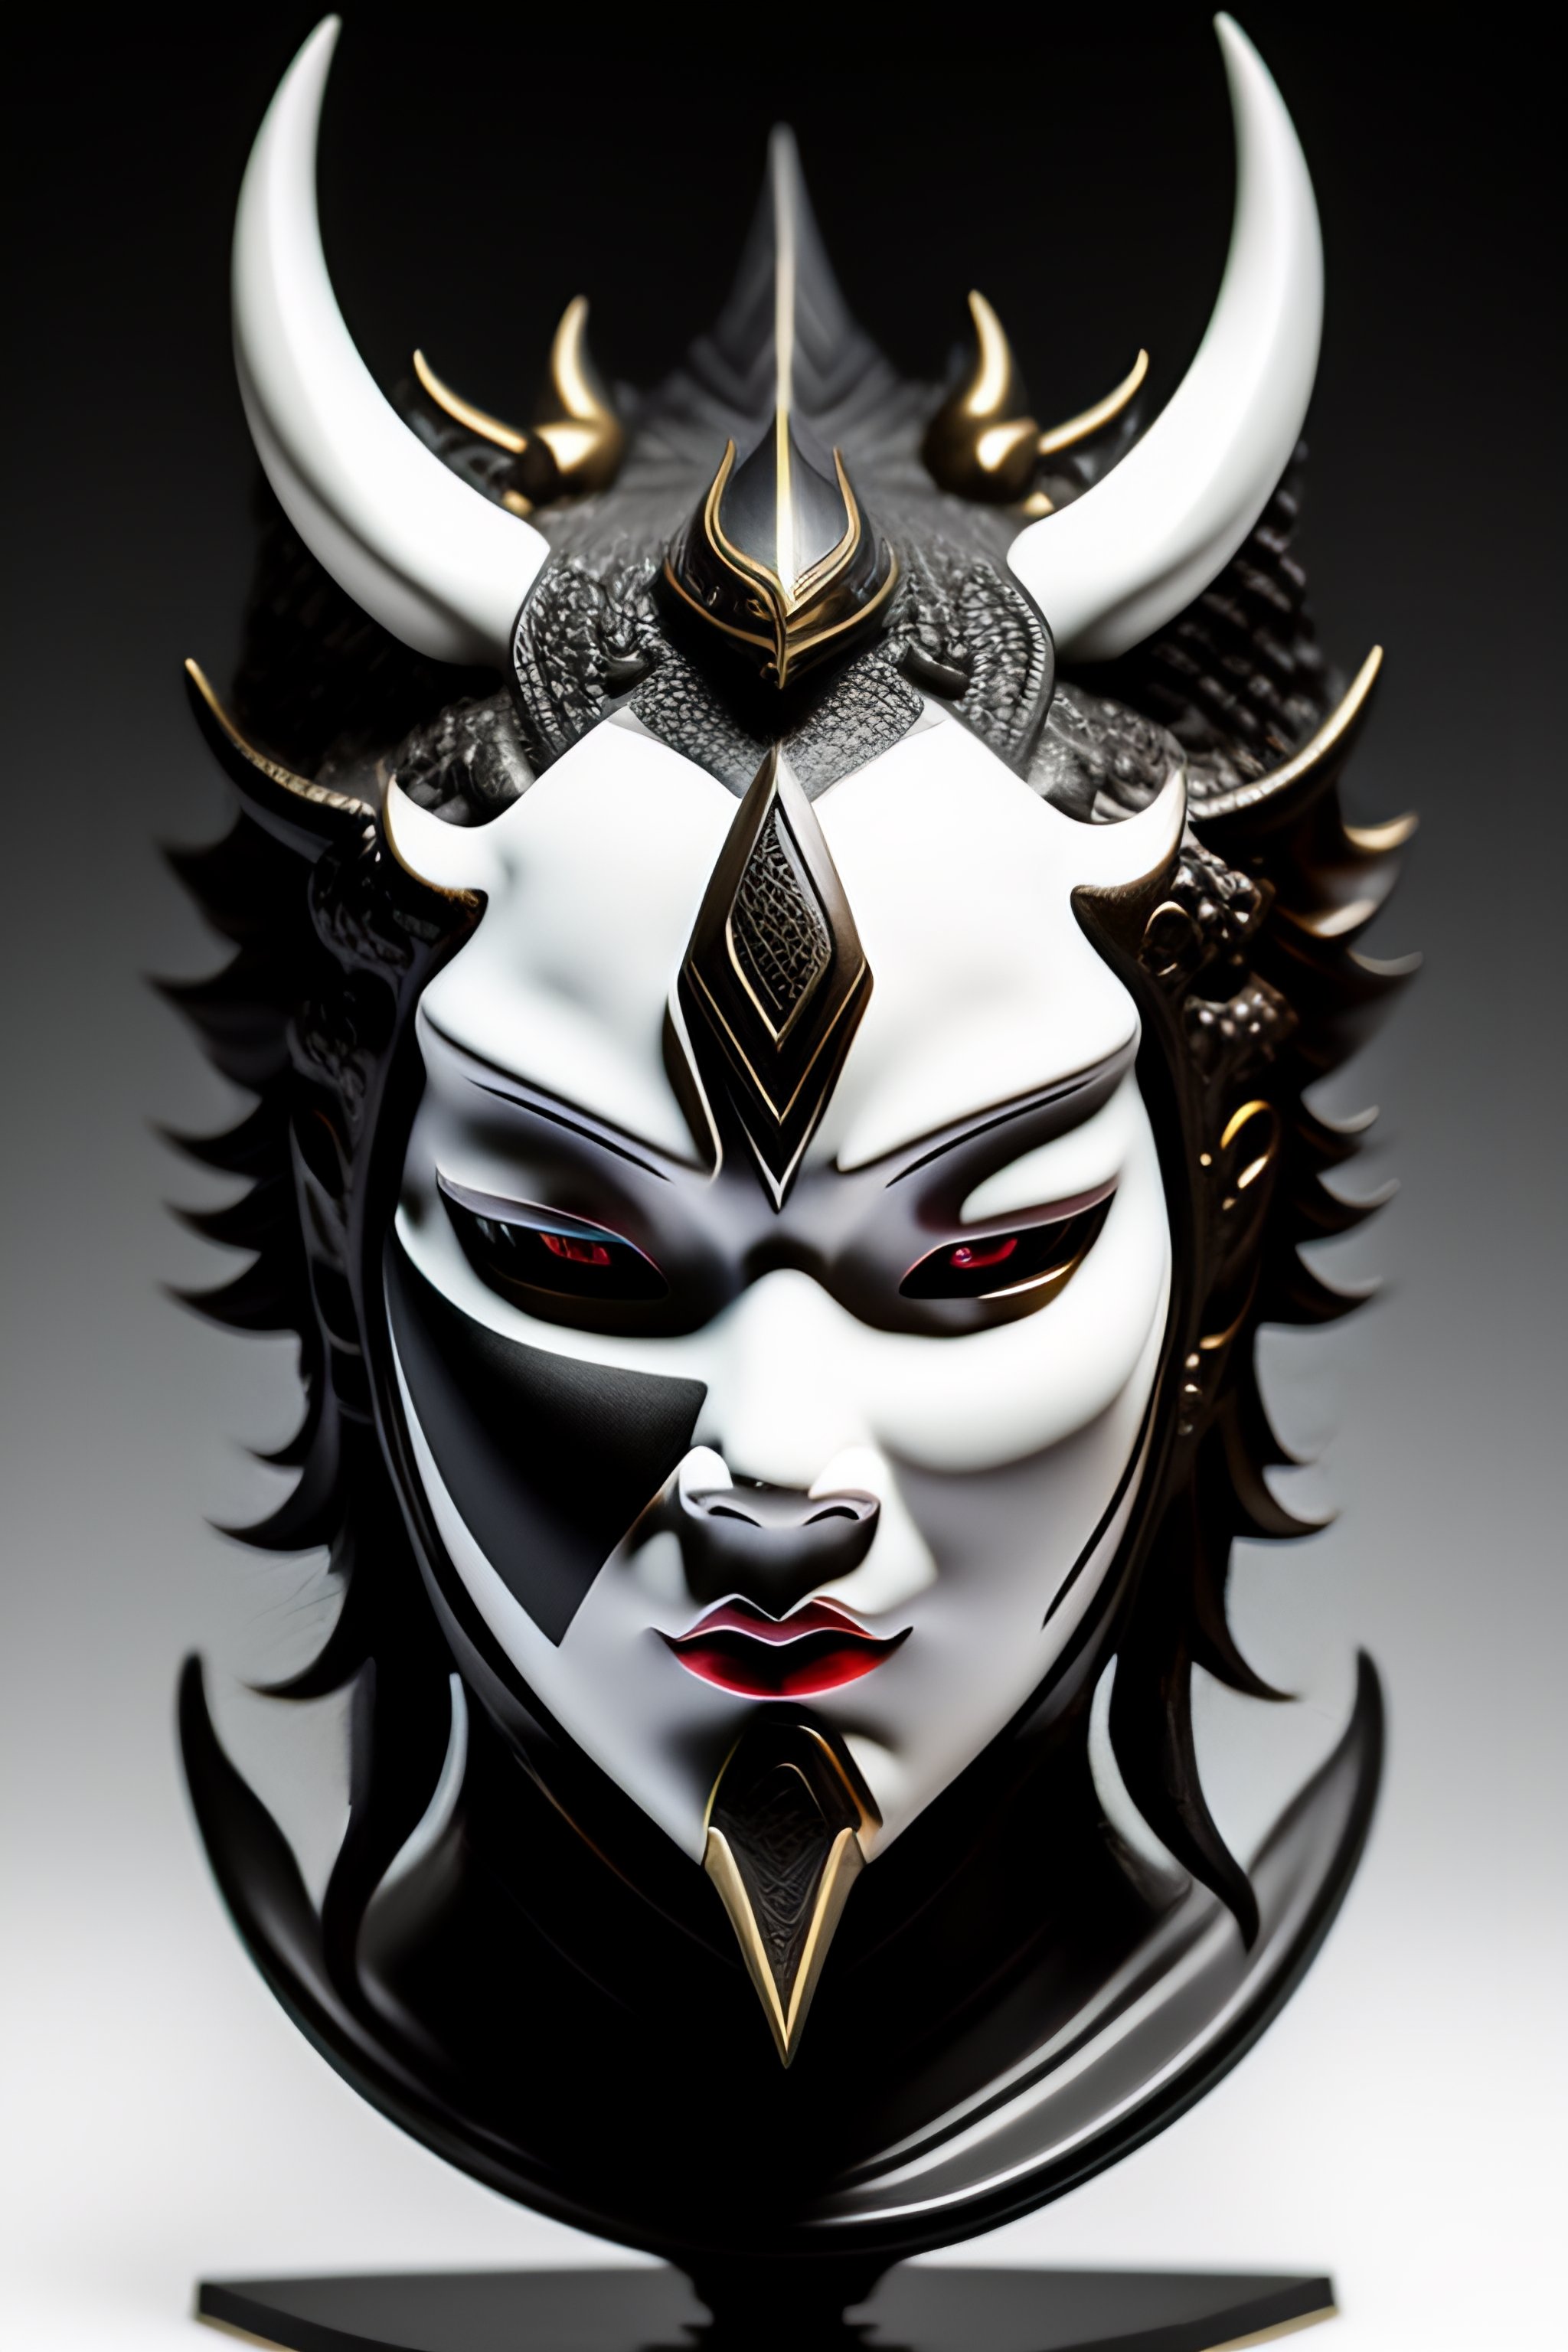 Lexica Only Oni Mask Cyberpunk White And Black 2dhighly Detailed Beautiful Organic Molding 2060